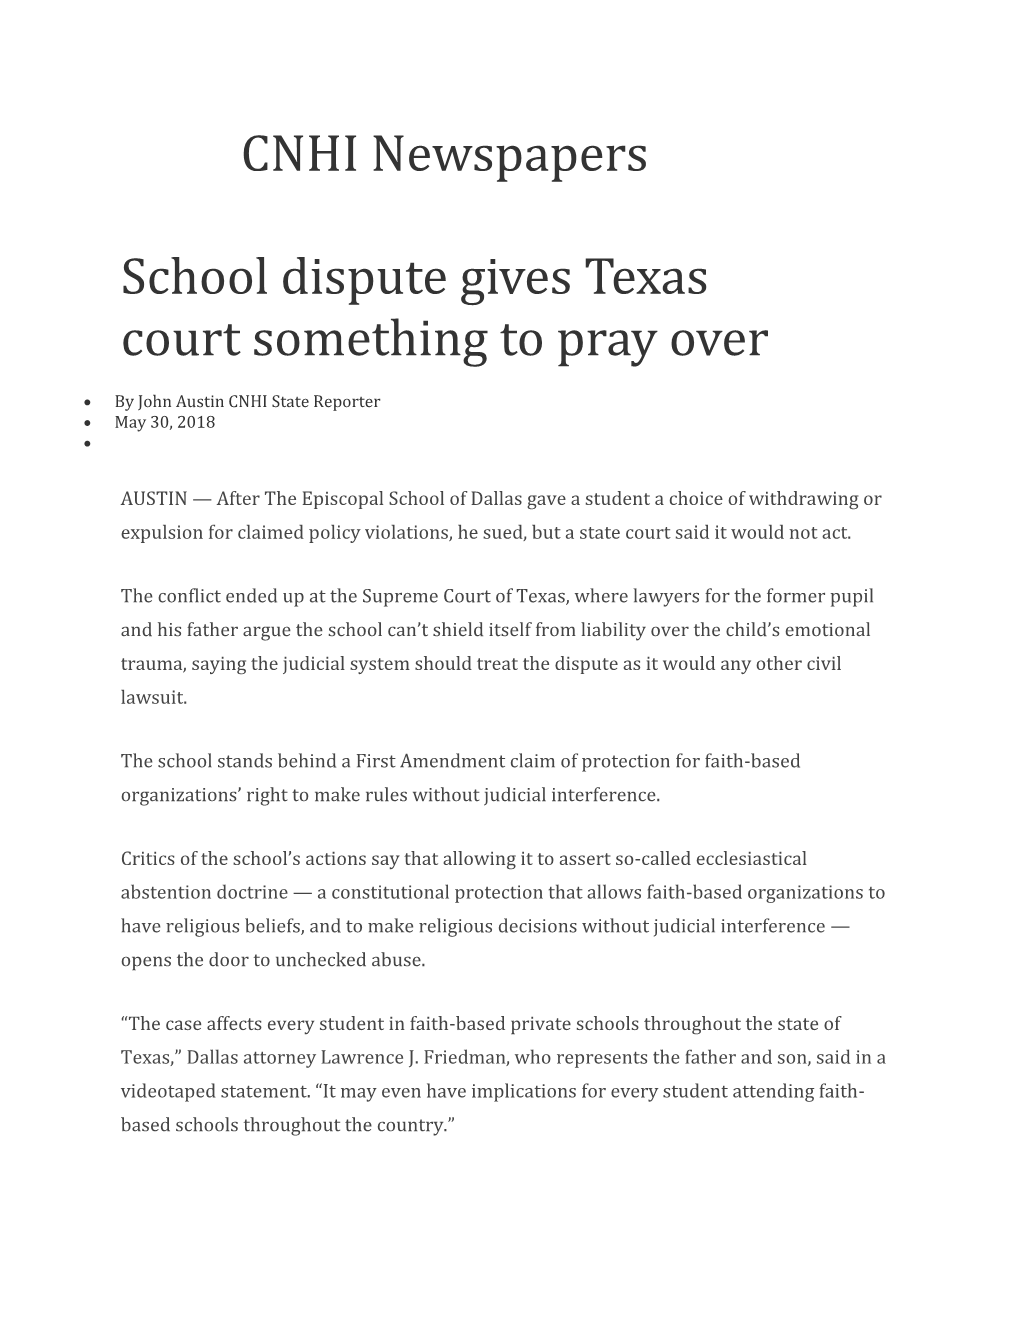 CNHI Newspapers School Dispute Gives Texas Court Something To